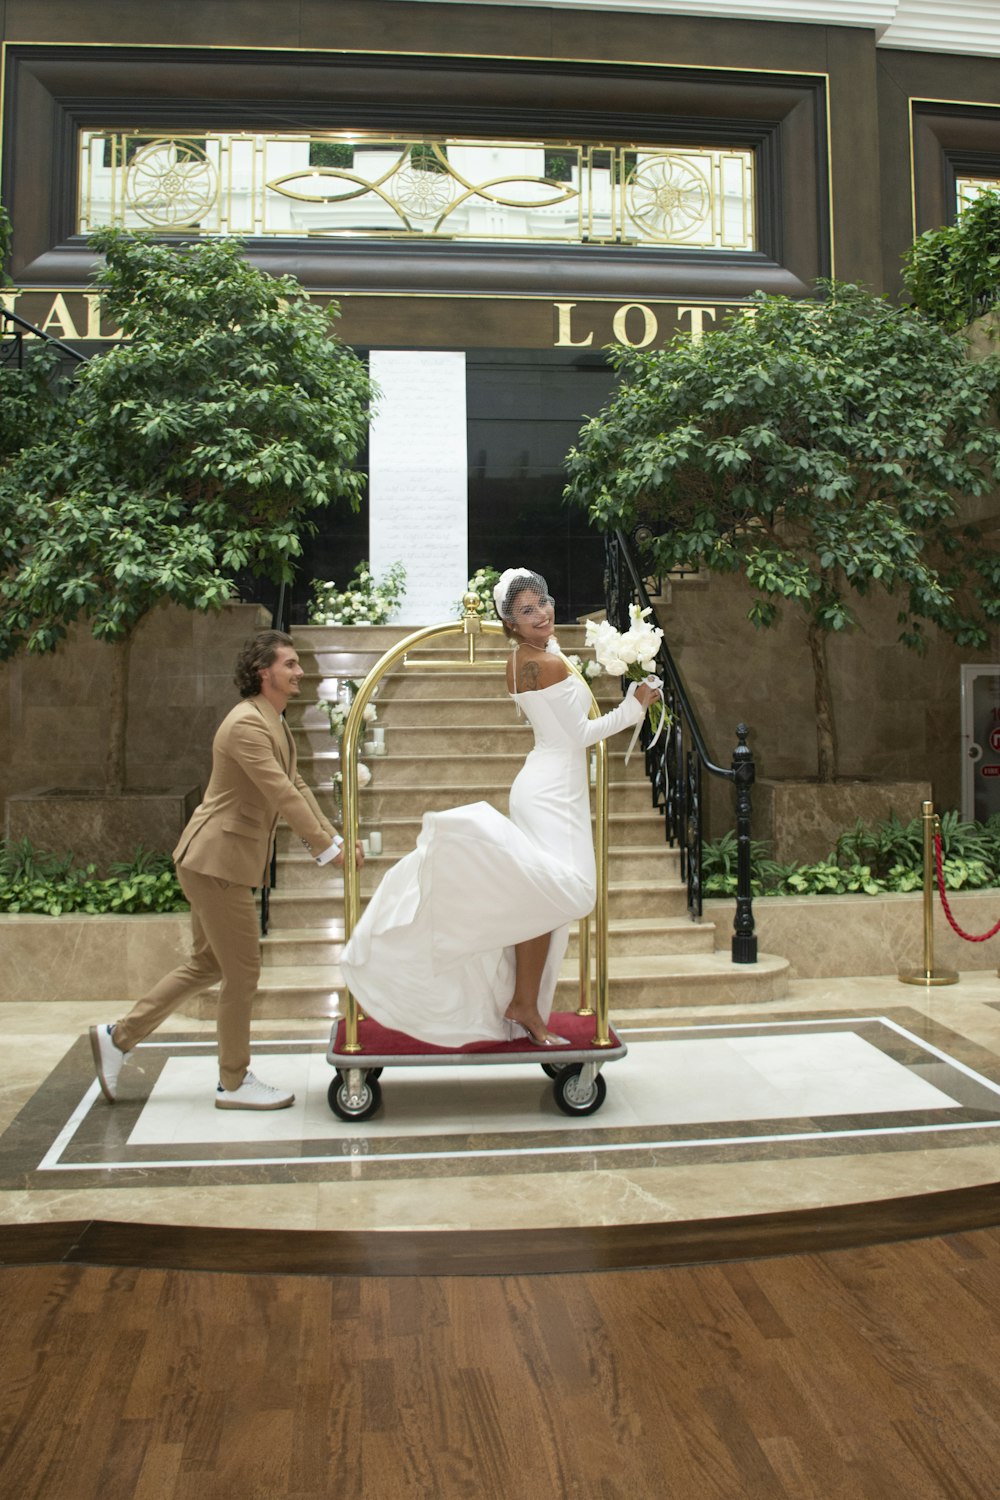 a woman in a white dress is pushing a hand cart